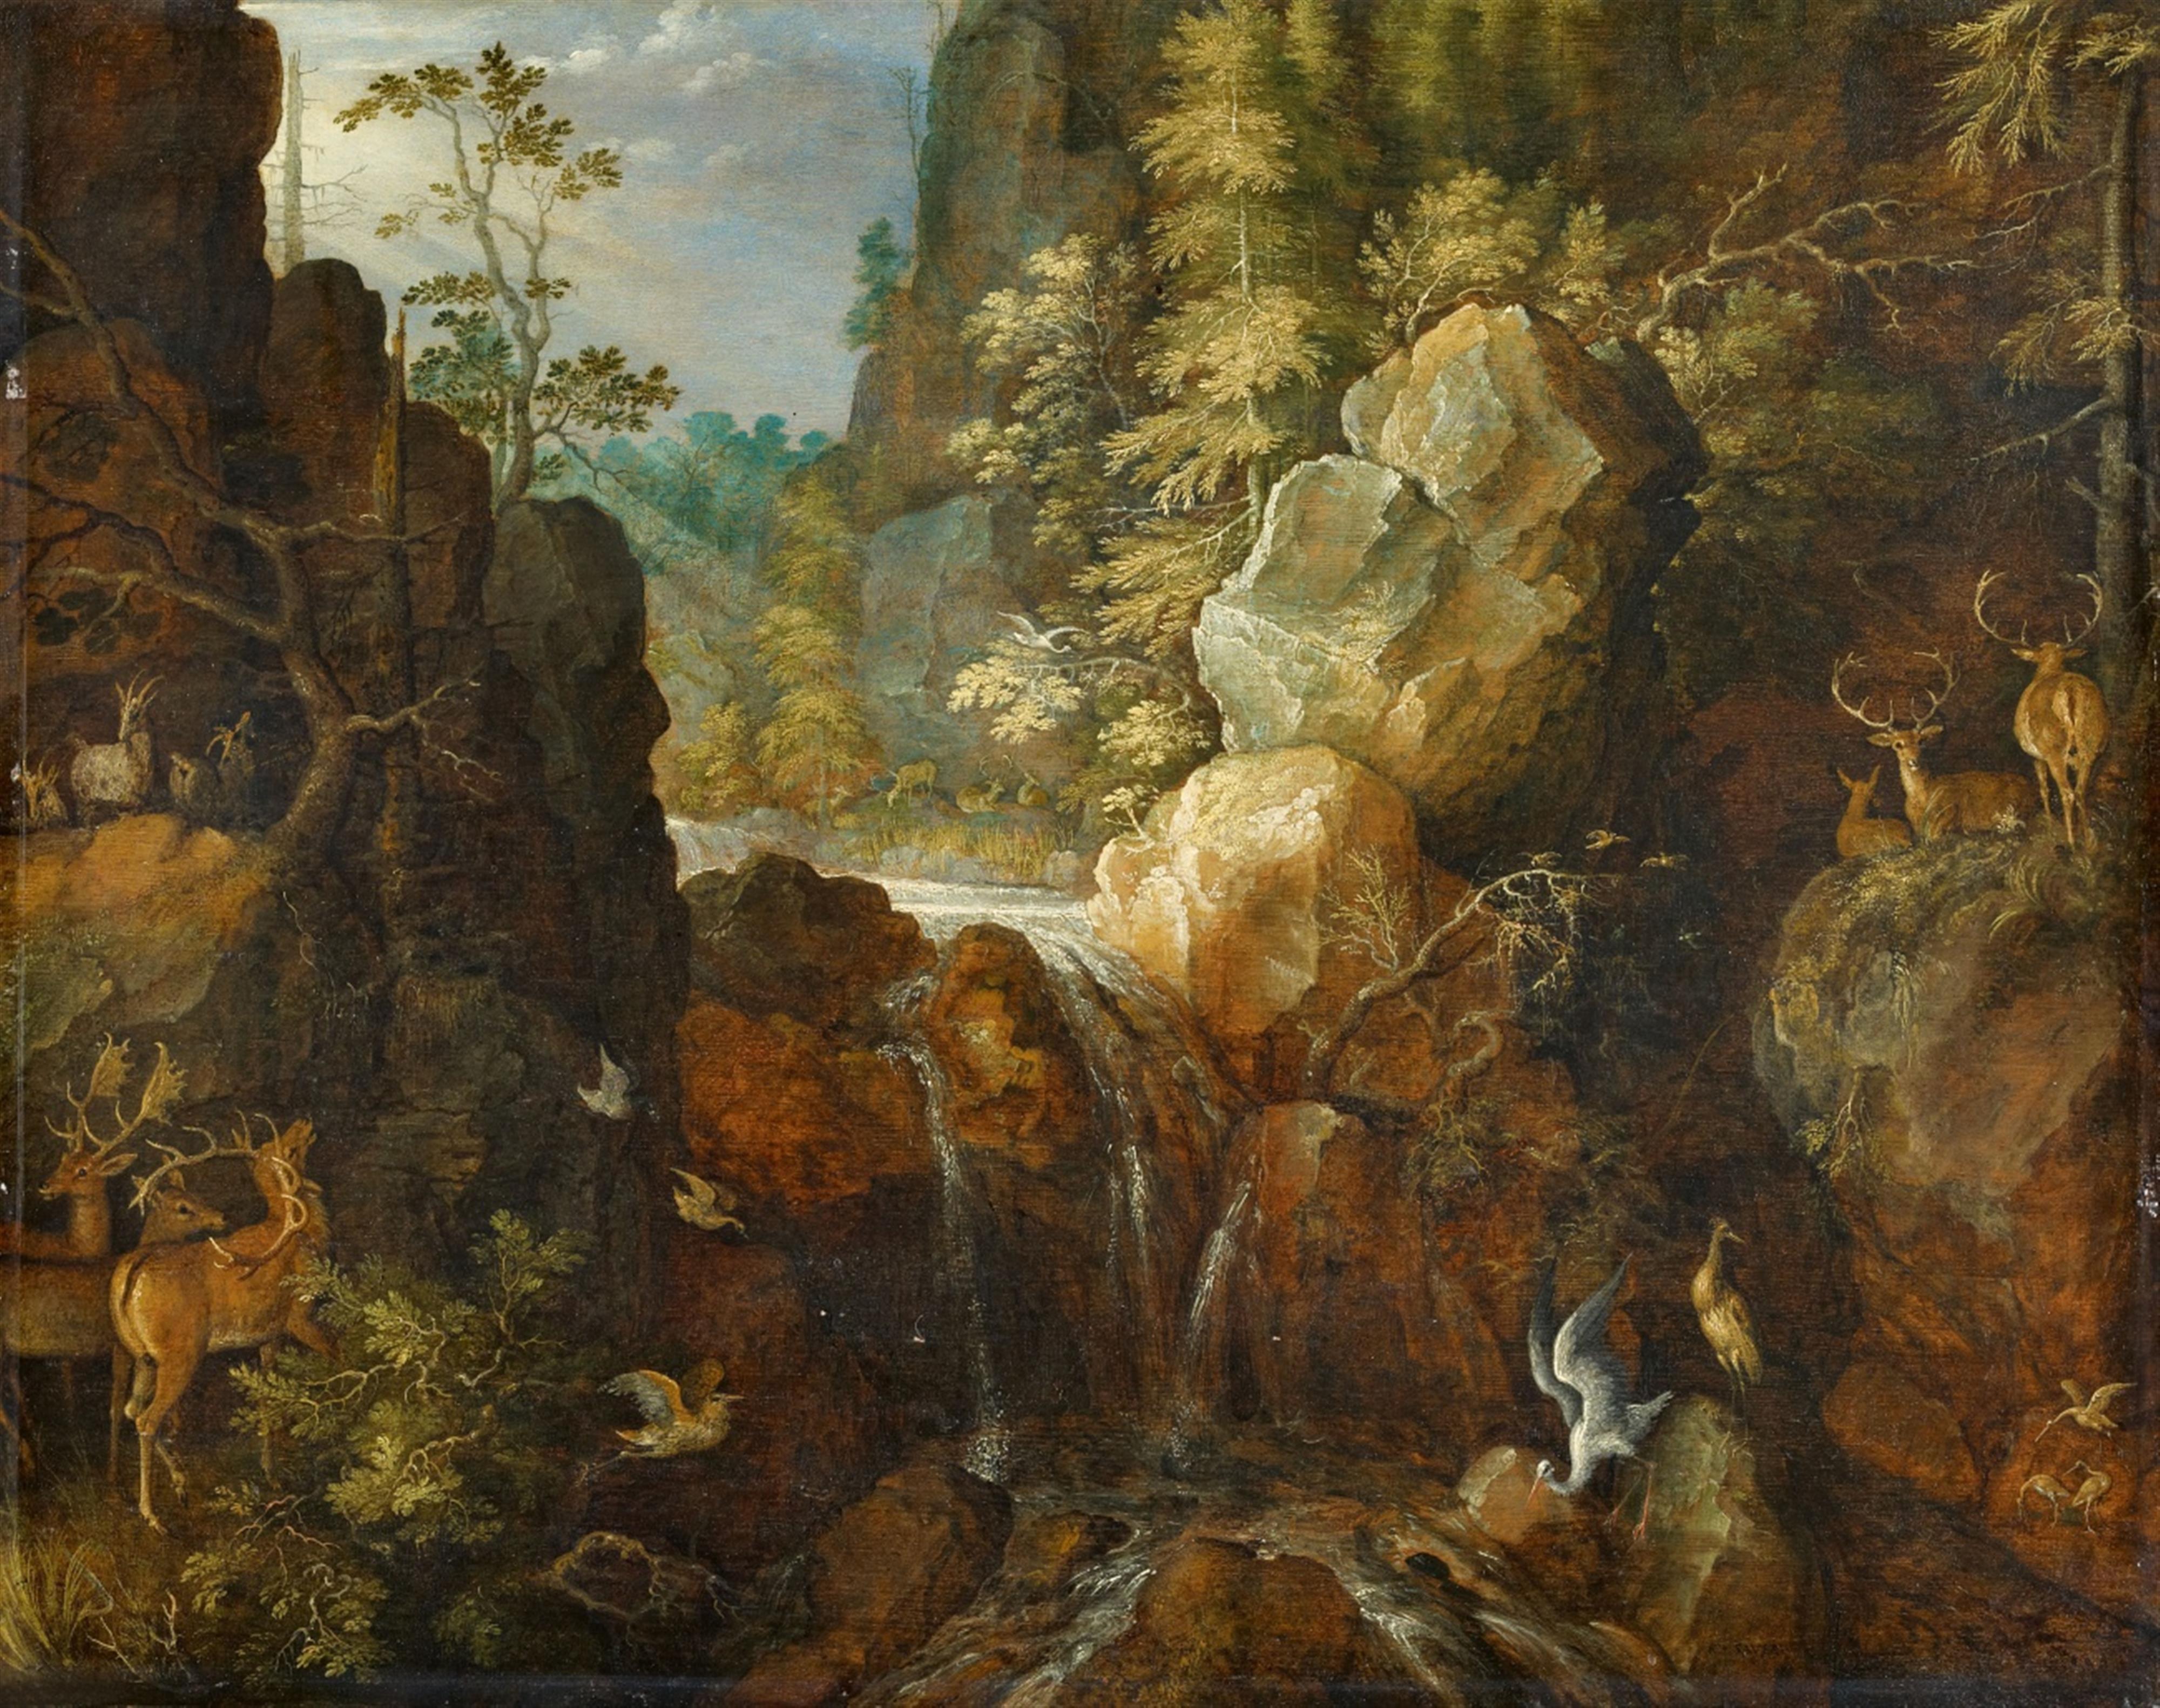 Roelant Savery - Mountain Landscape with Deer and a Stork by a Waterfall - image-1